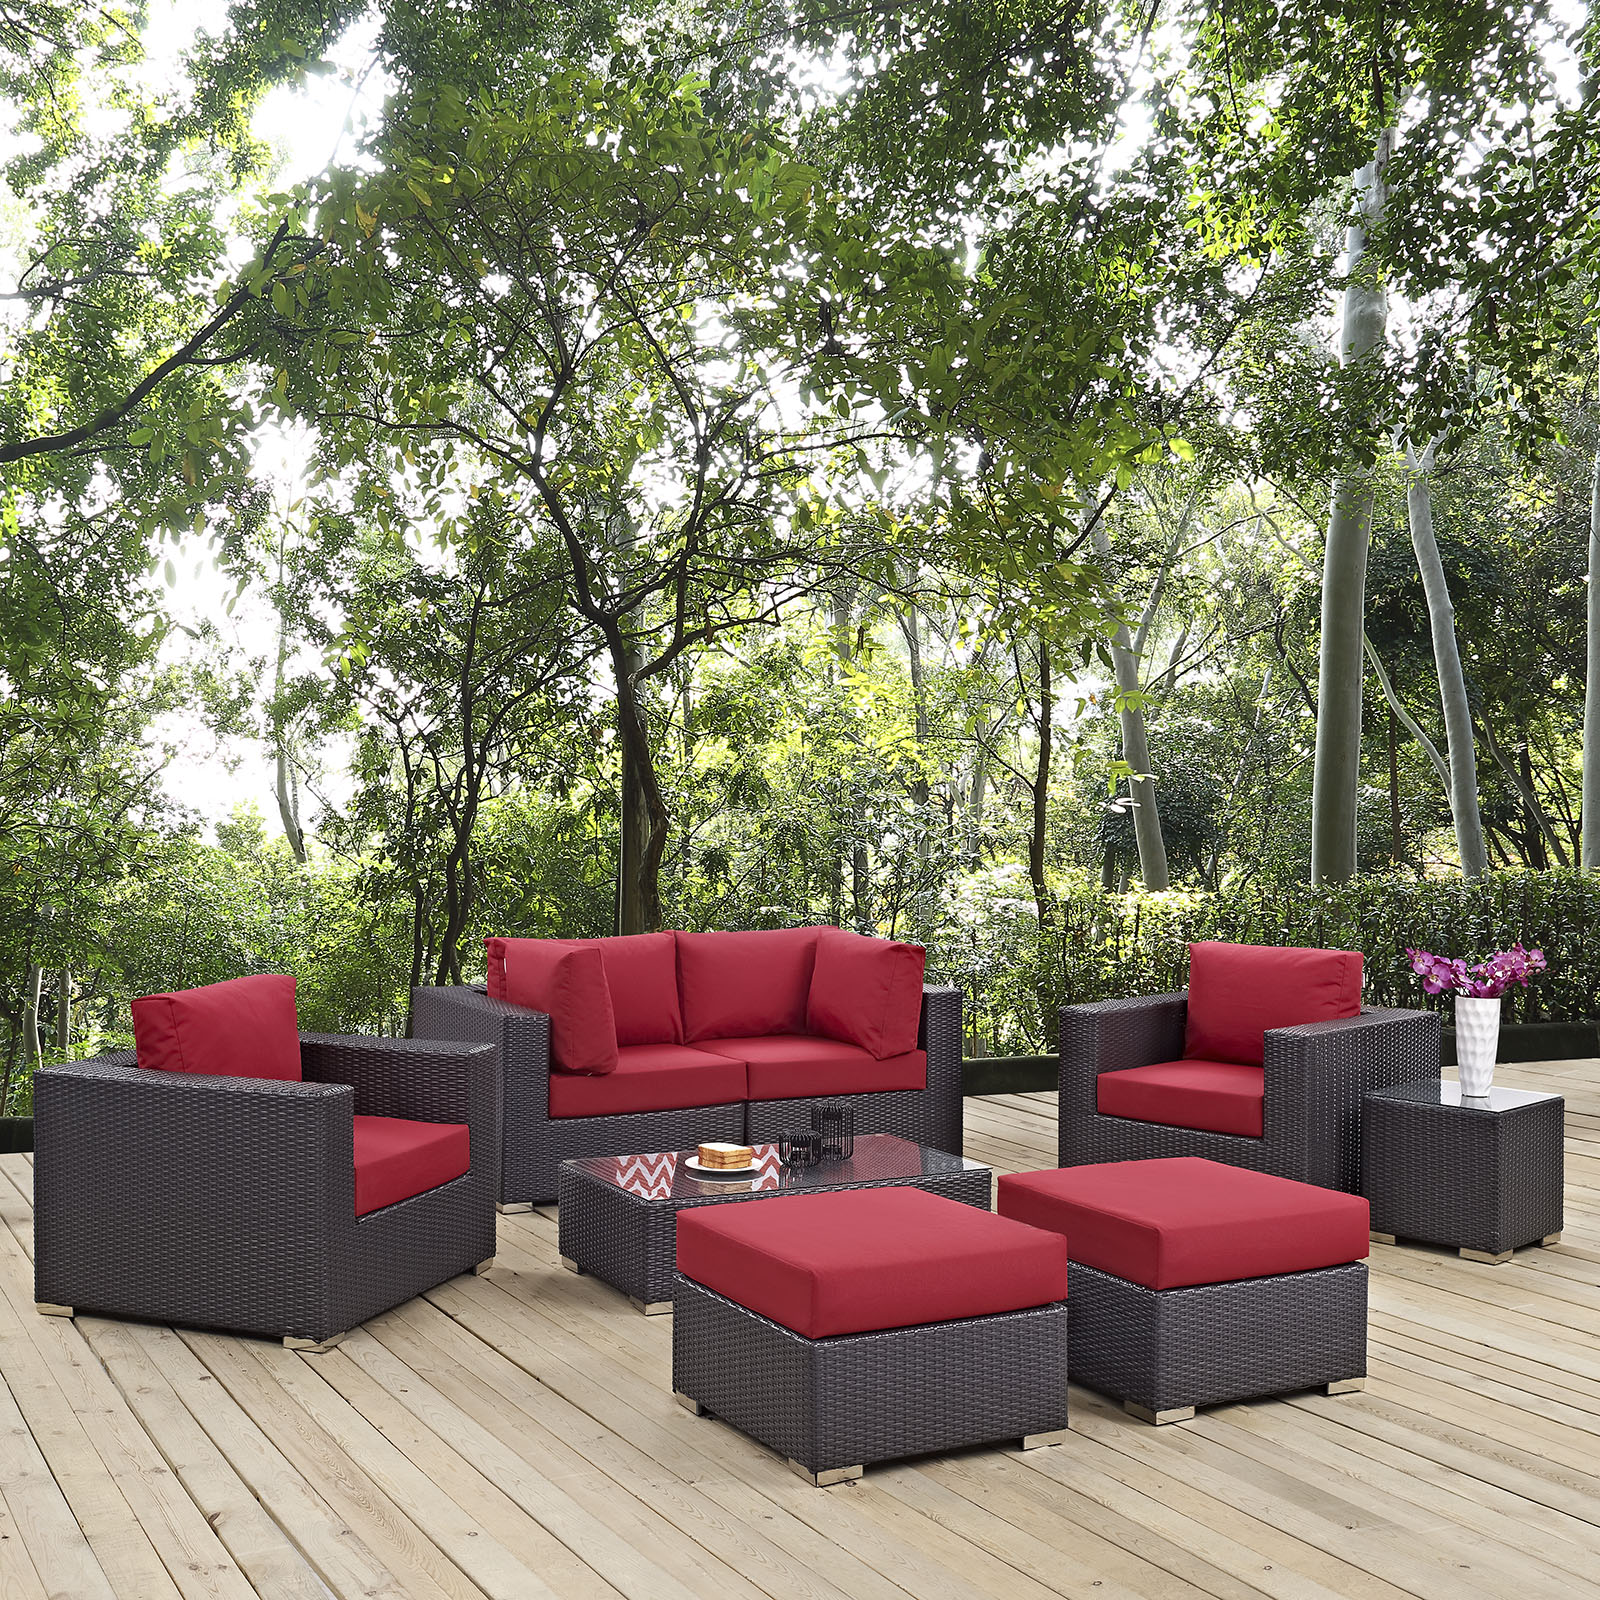 Modway Convene 8 Piece Outdoor Patio Sectional Set in Espresso Red - image 1 of 11